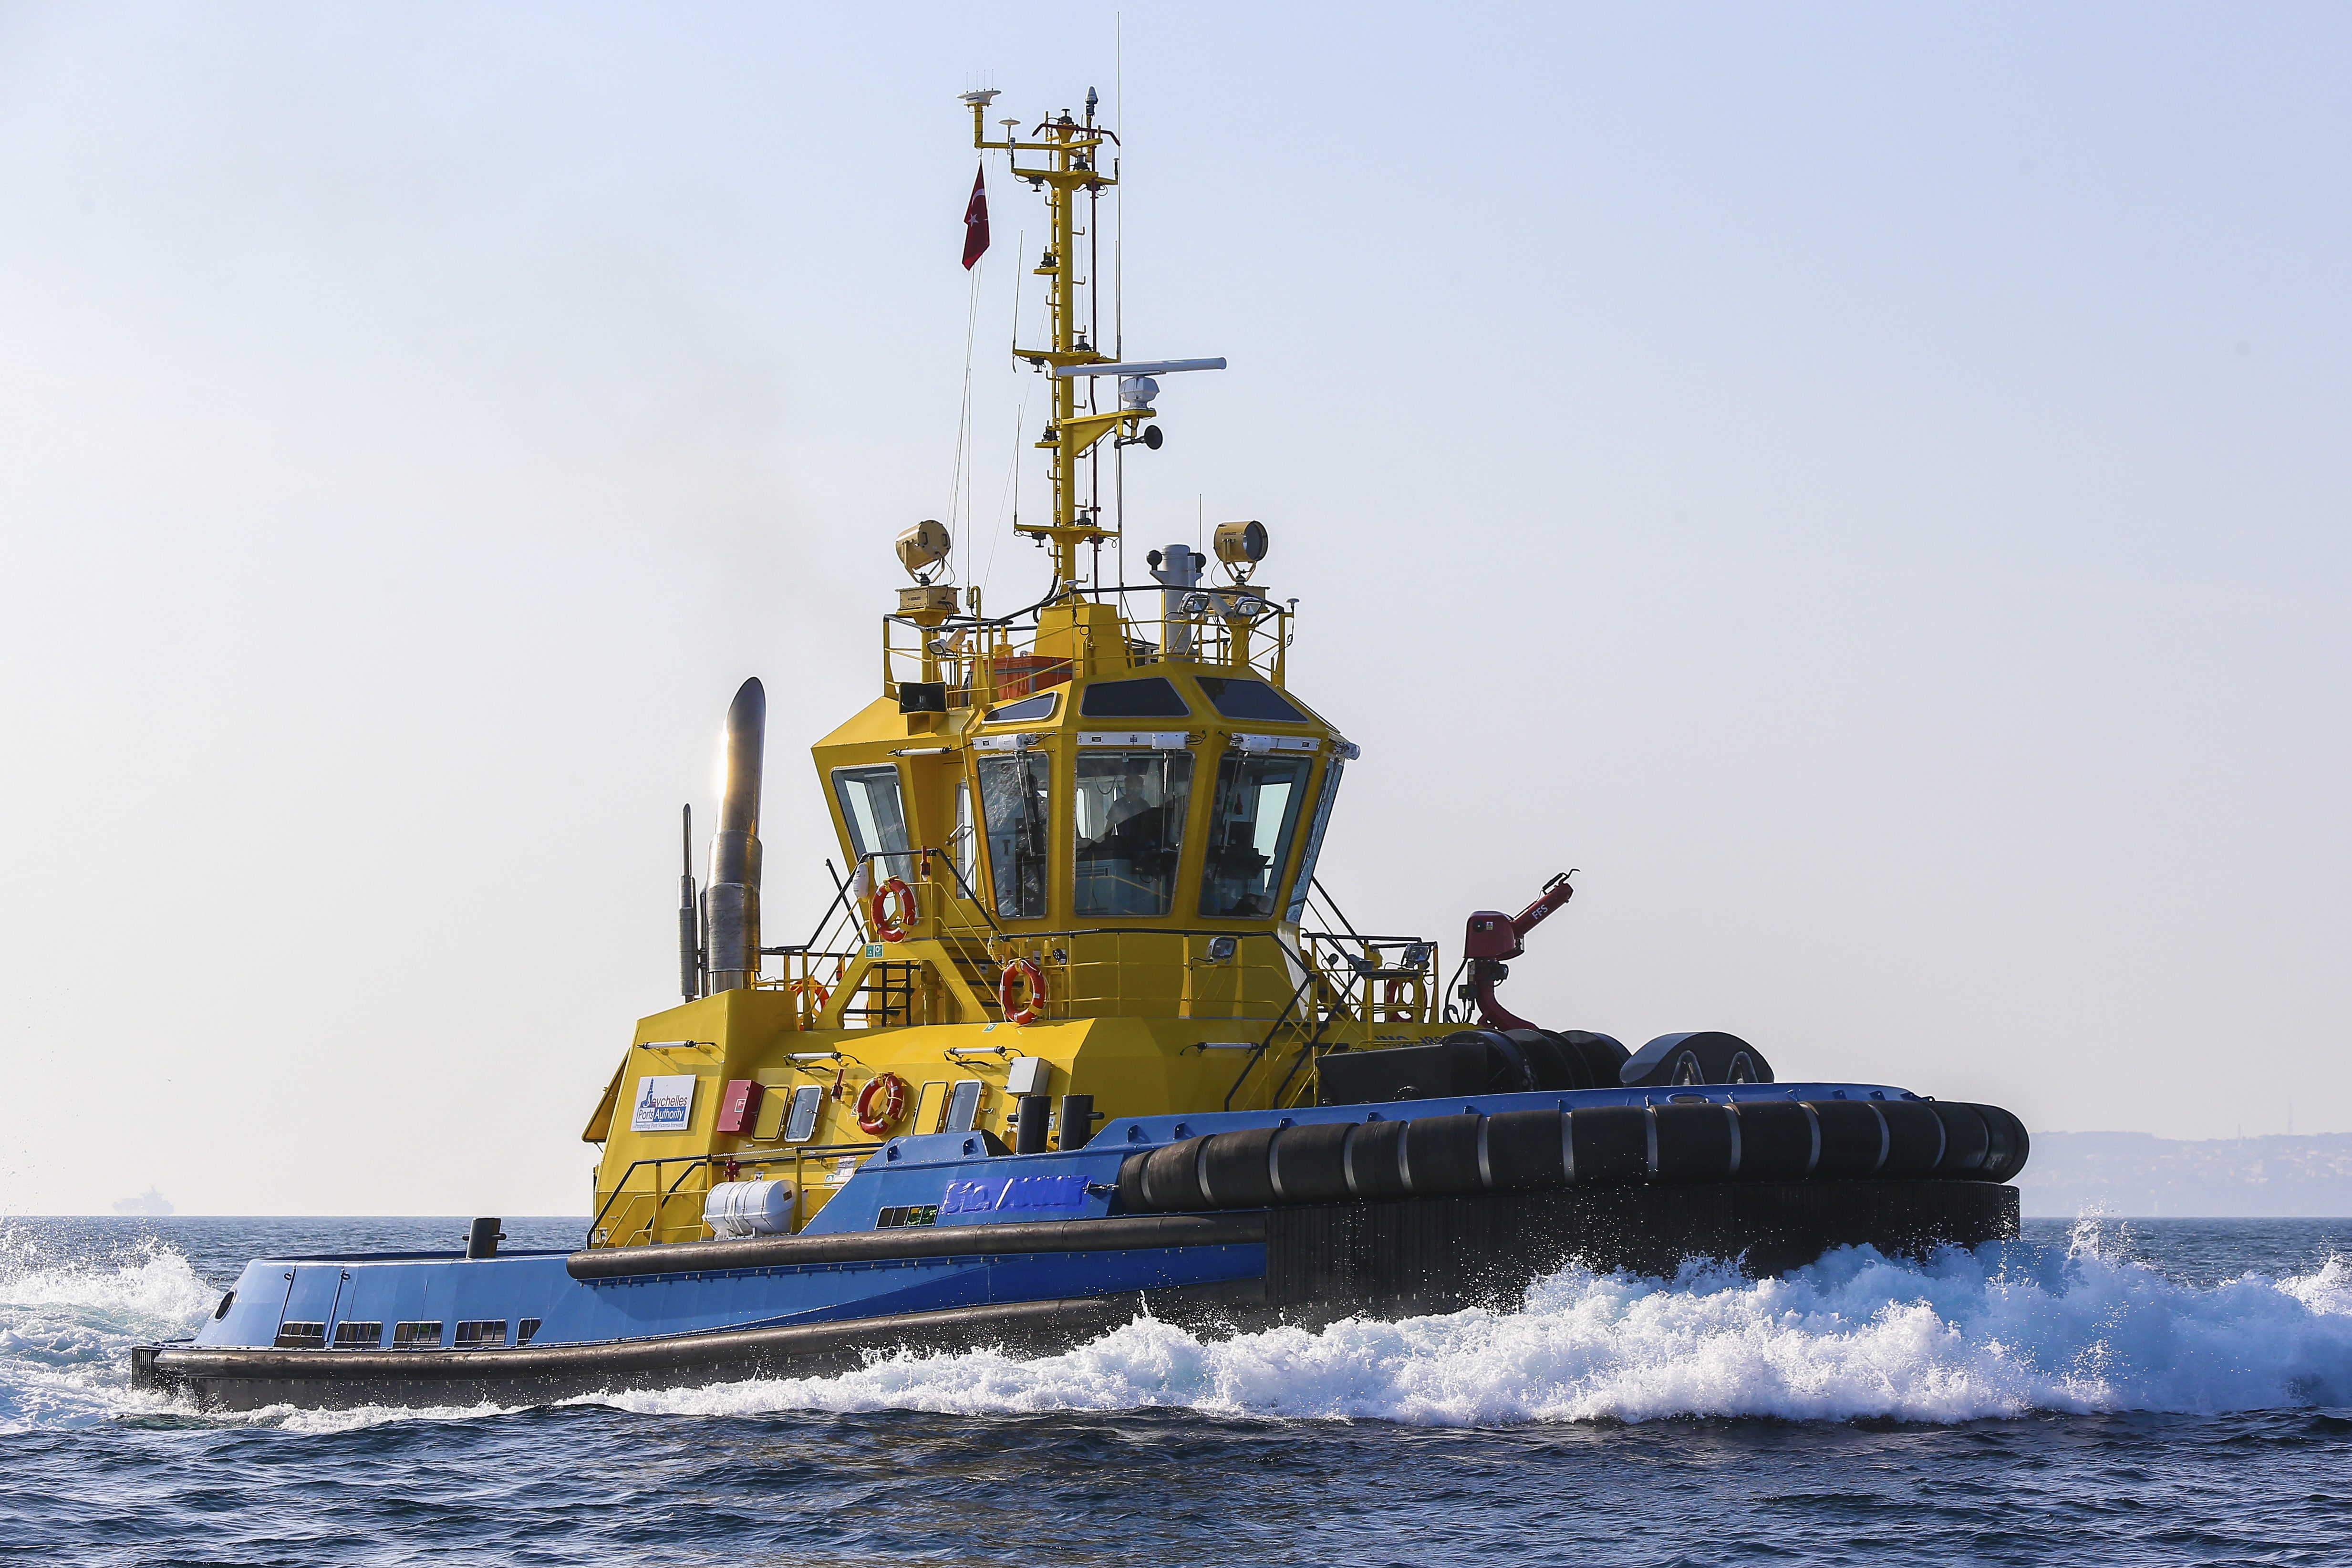 Seychelles Ports Authority to accept delivery of the new tug from Sanmar